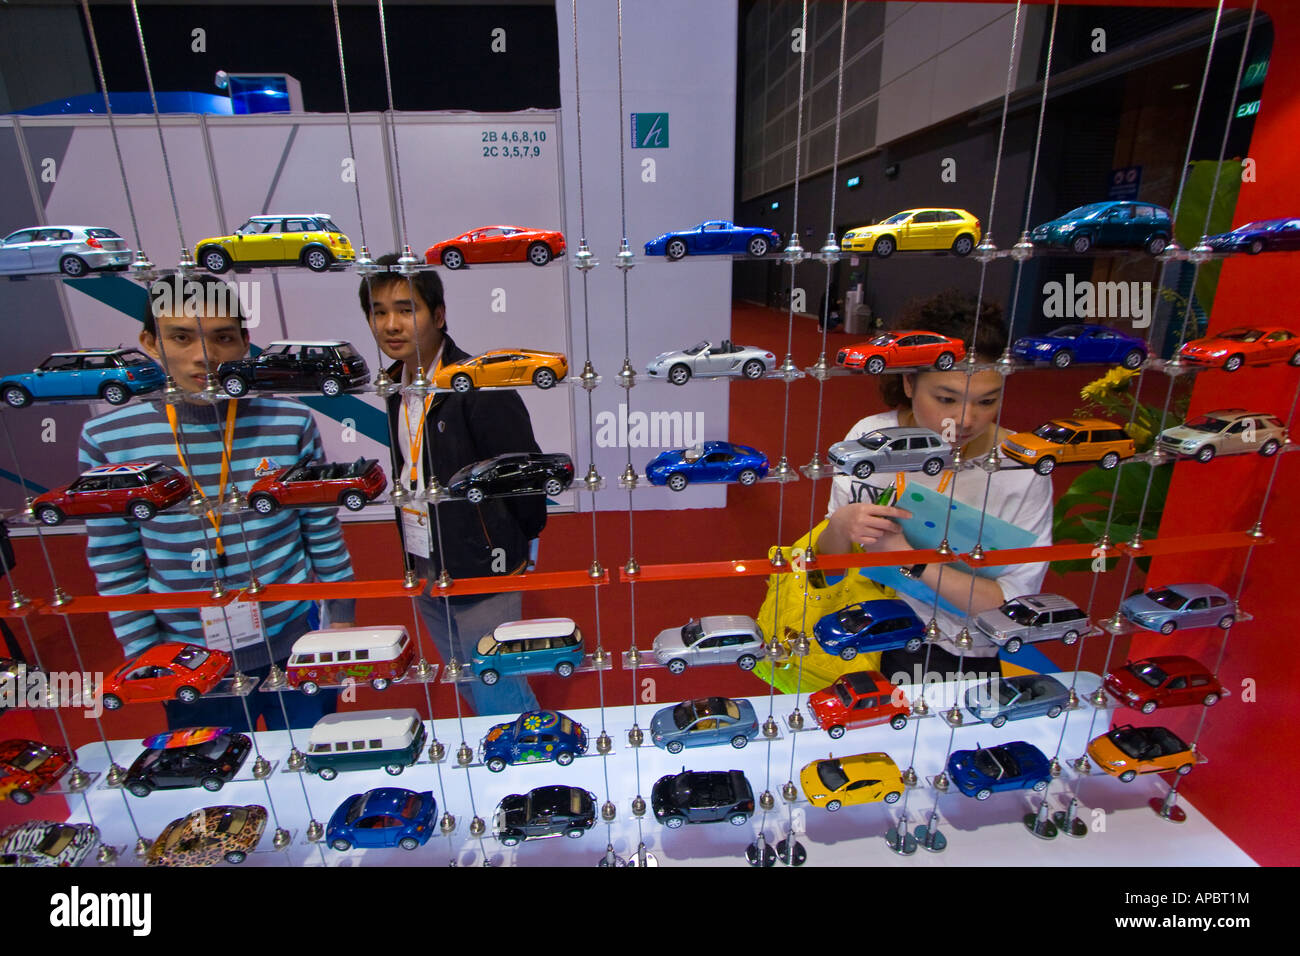 Kinsmart Miniature Car Manufacturer at Toy and Games Fair Hong Kong Convention and Exhibition Centre Stock Photo